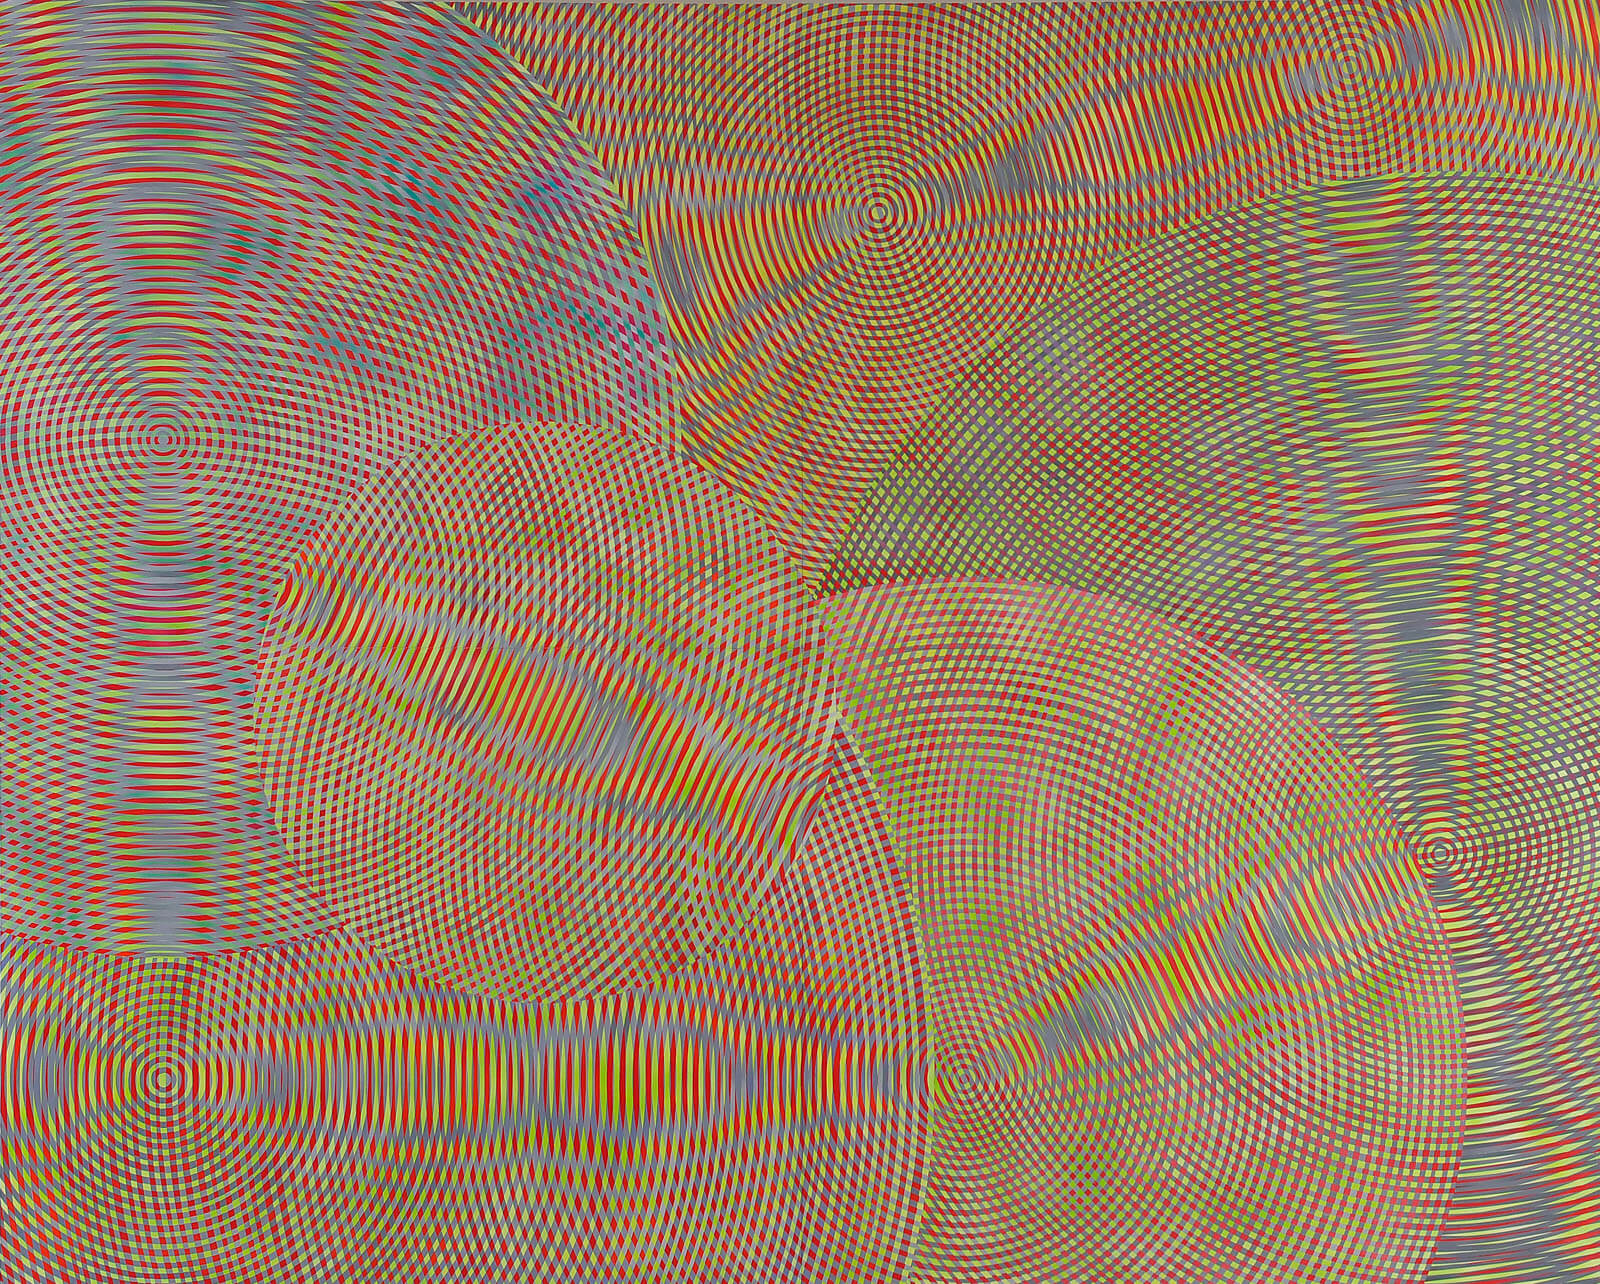 sonic-network-no.-6-oil-and-acrylic-on-canvas-244x305cm-2009